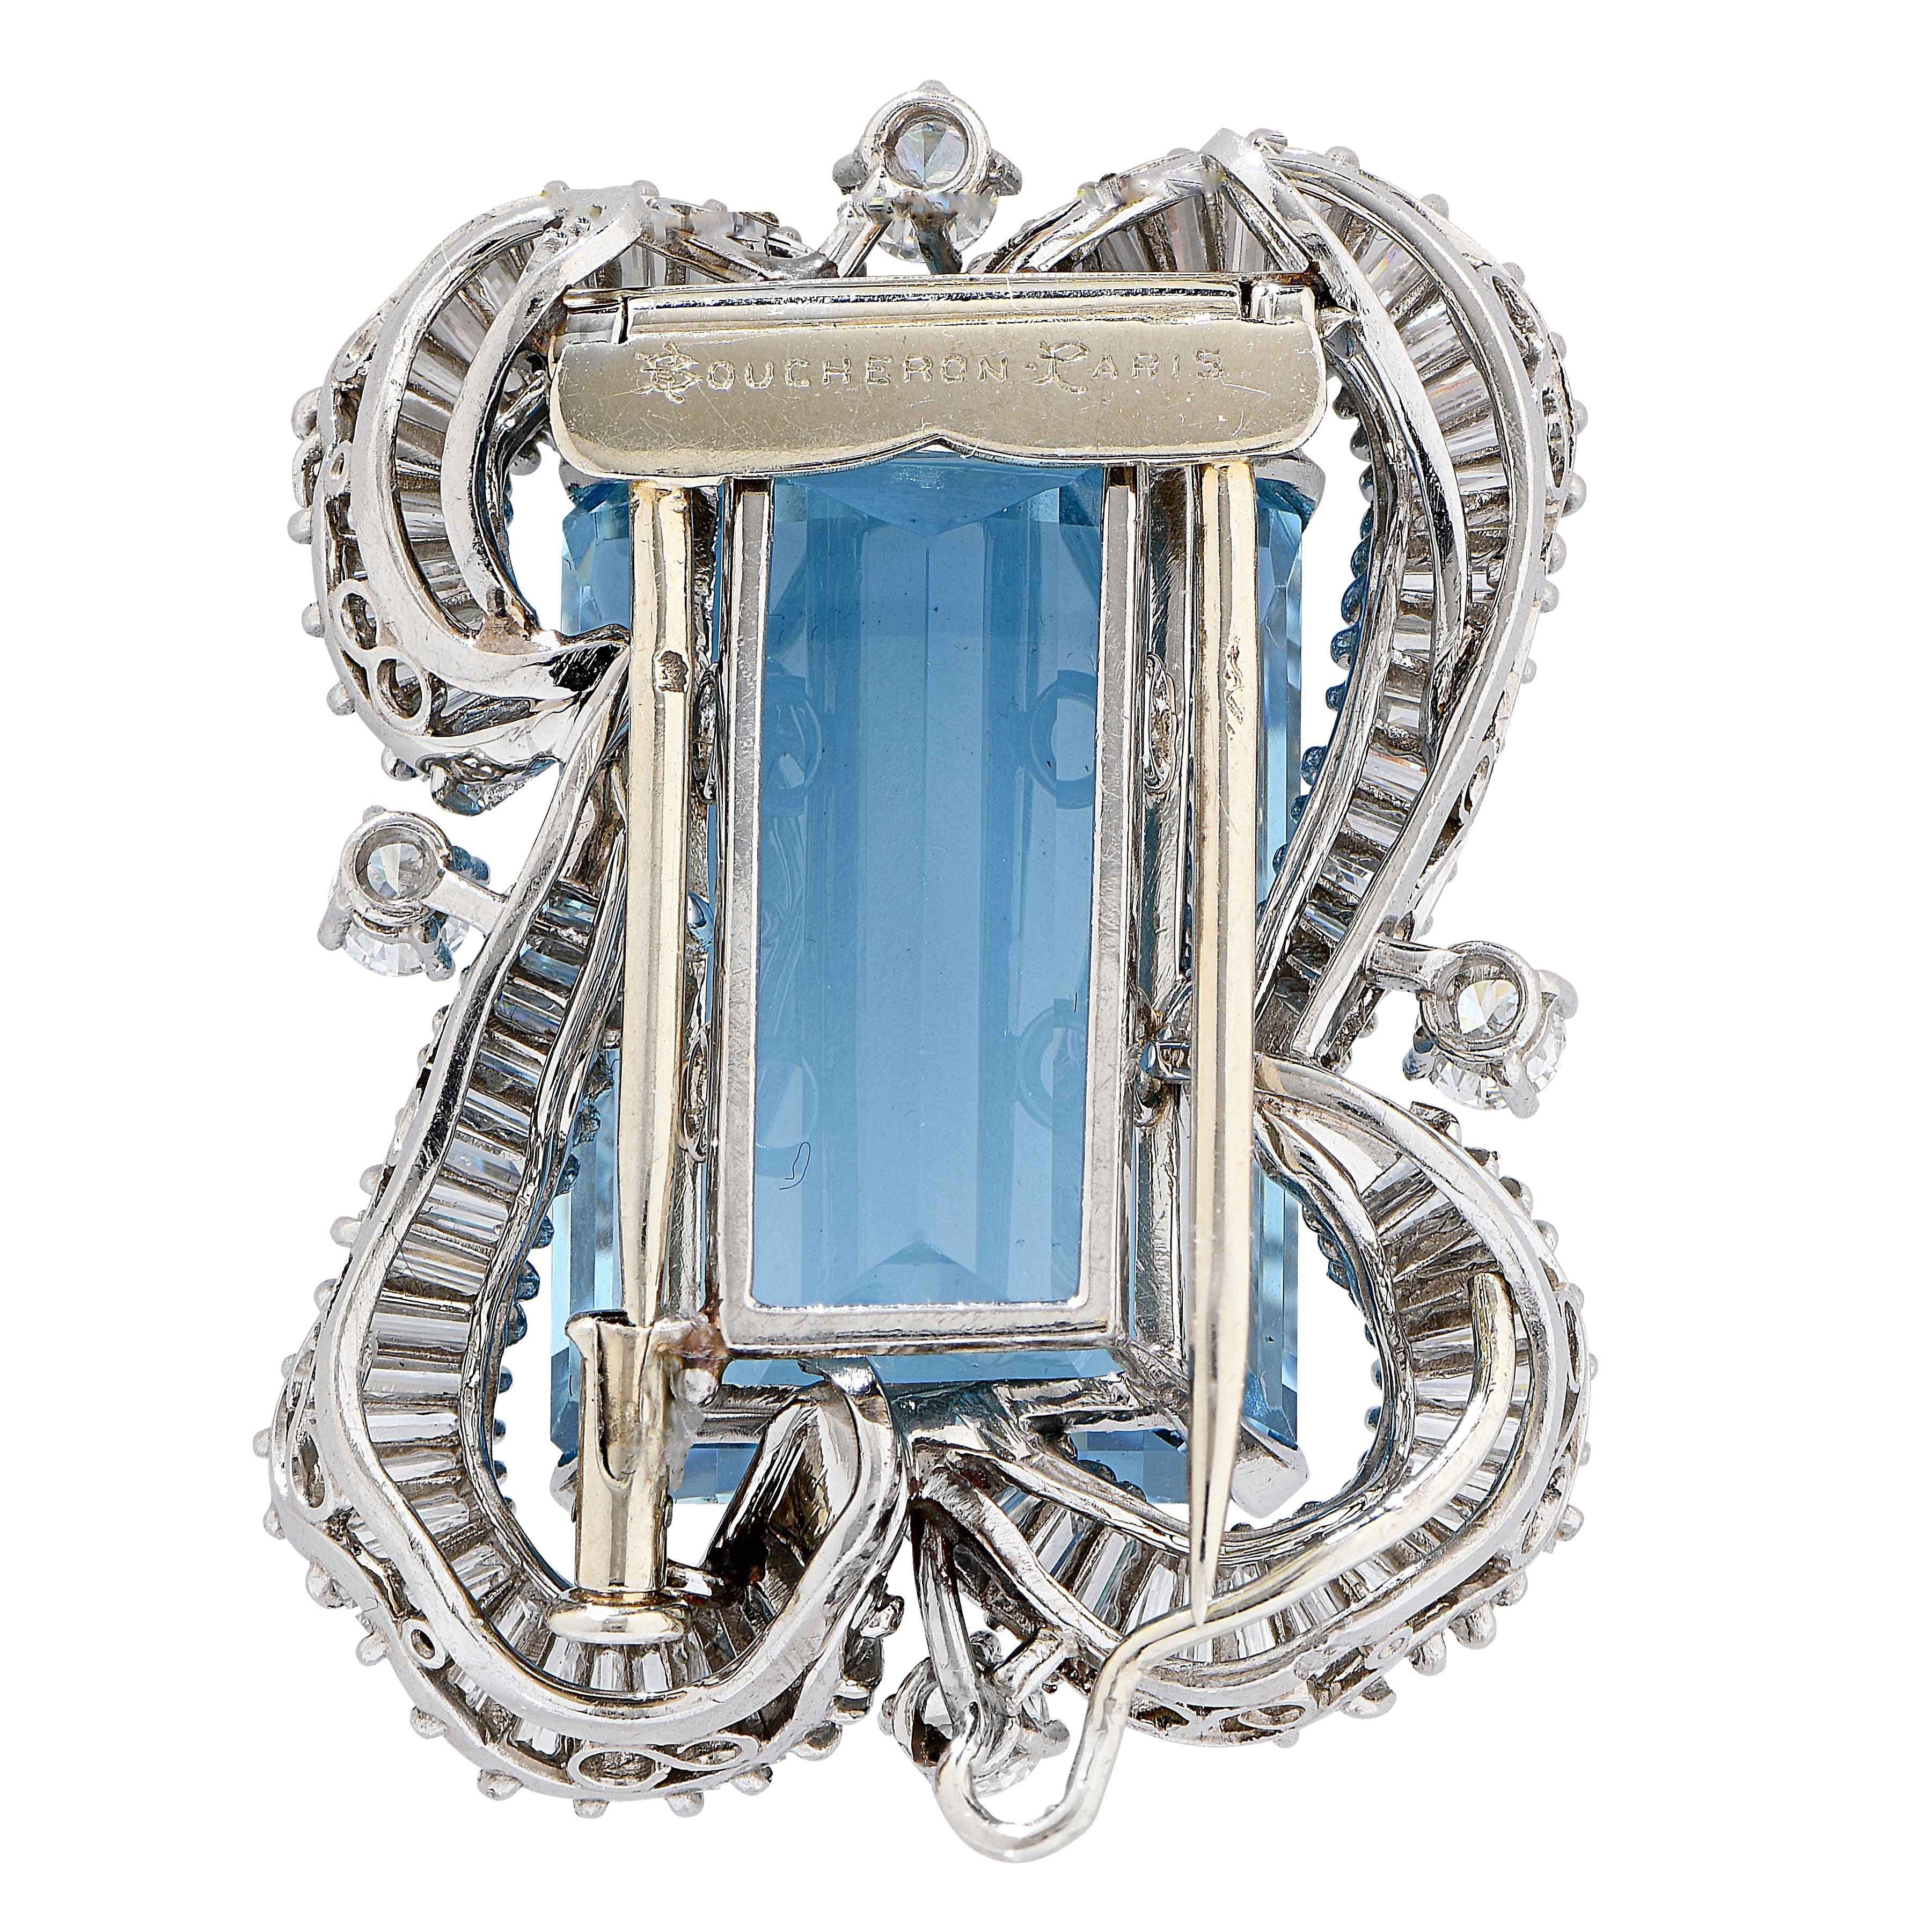 Boucheron Paris Aquamarine and Diamond Platinum and 18kt white gold brooch. This gorgeous brooch features a rectangular cut aquamarine with an estimated total weight of 32.5 carats and 68 diamonds with an estimated total weight of 5.4 carats F color